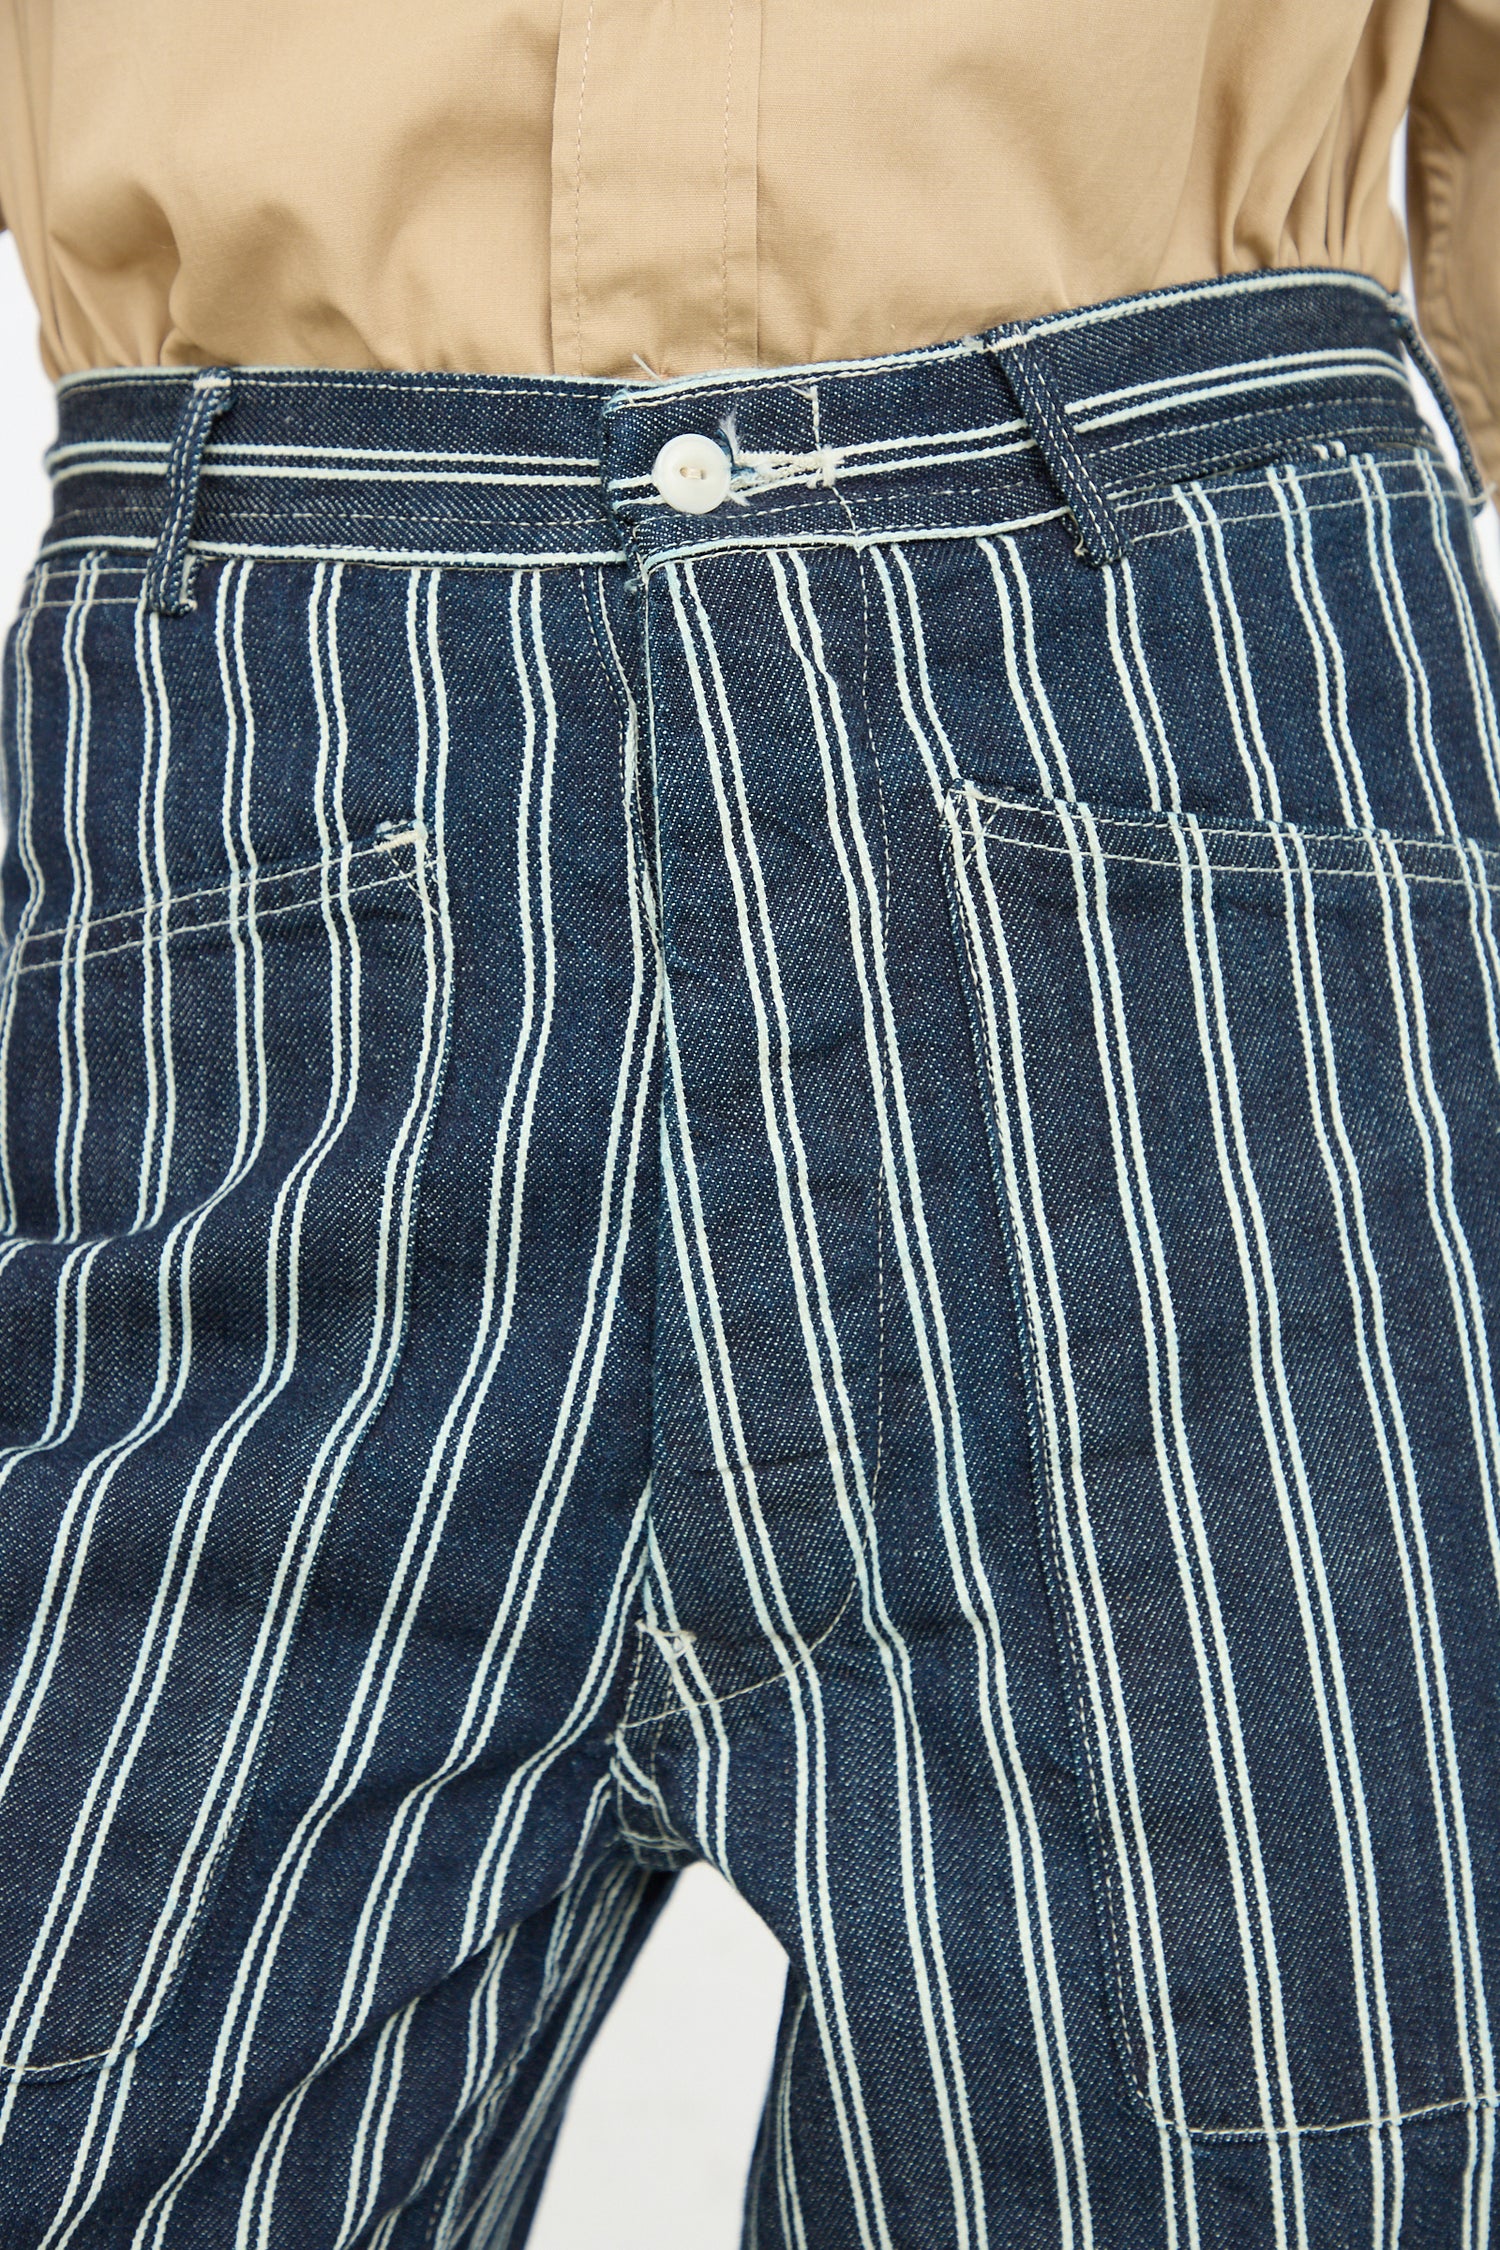 A close-up image of a person wearing As Ever's Brancusi Pant in Indigo Denim Stripe and a beige shirt tucked in at the waistline.